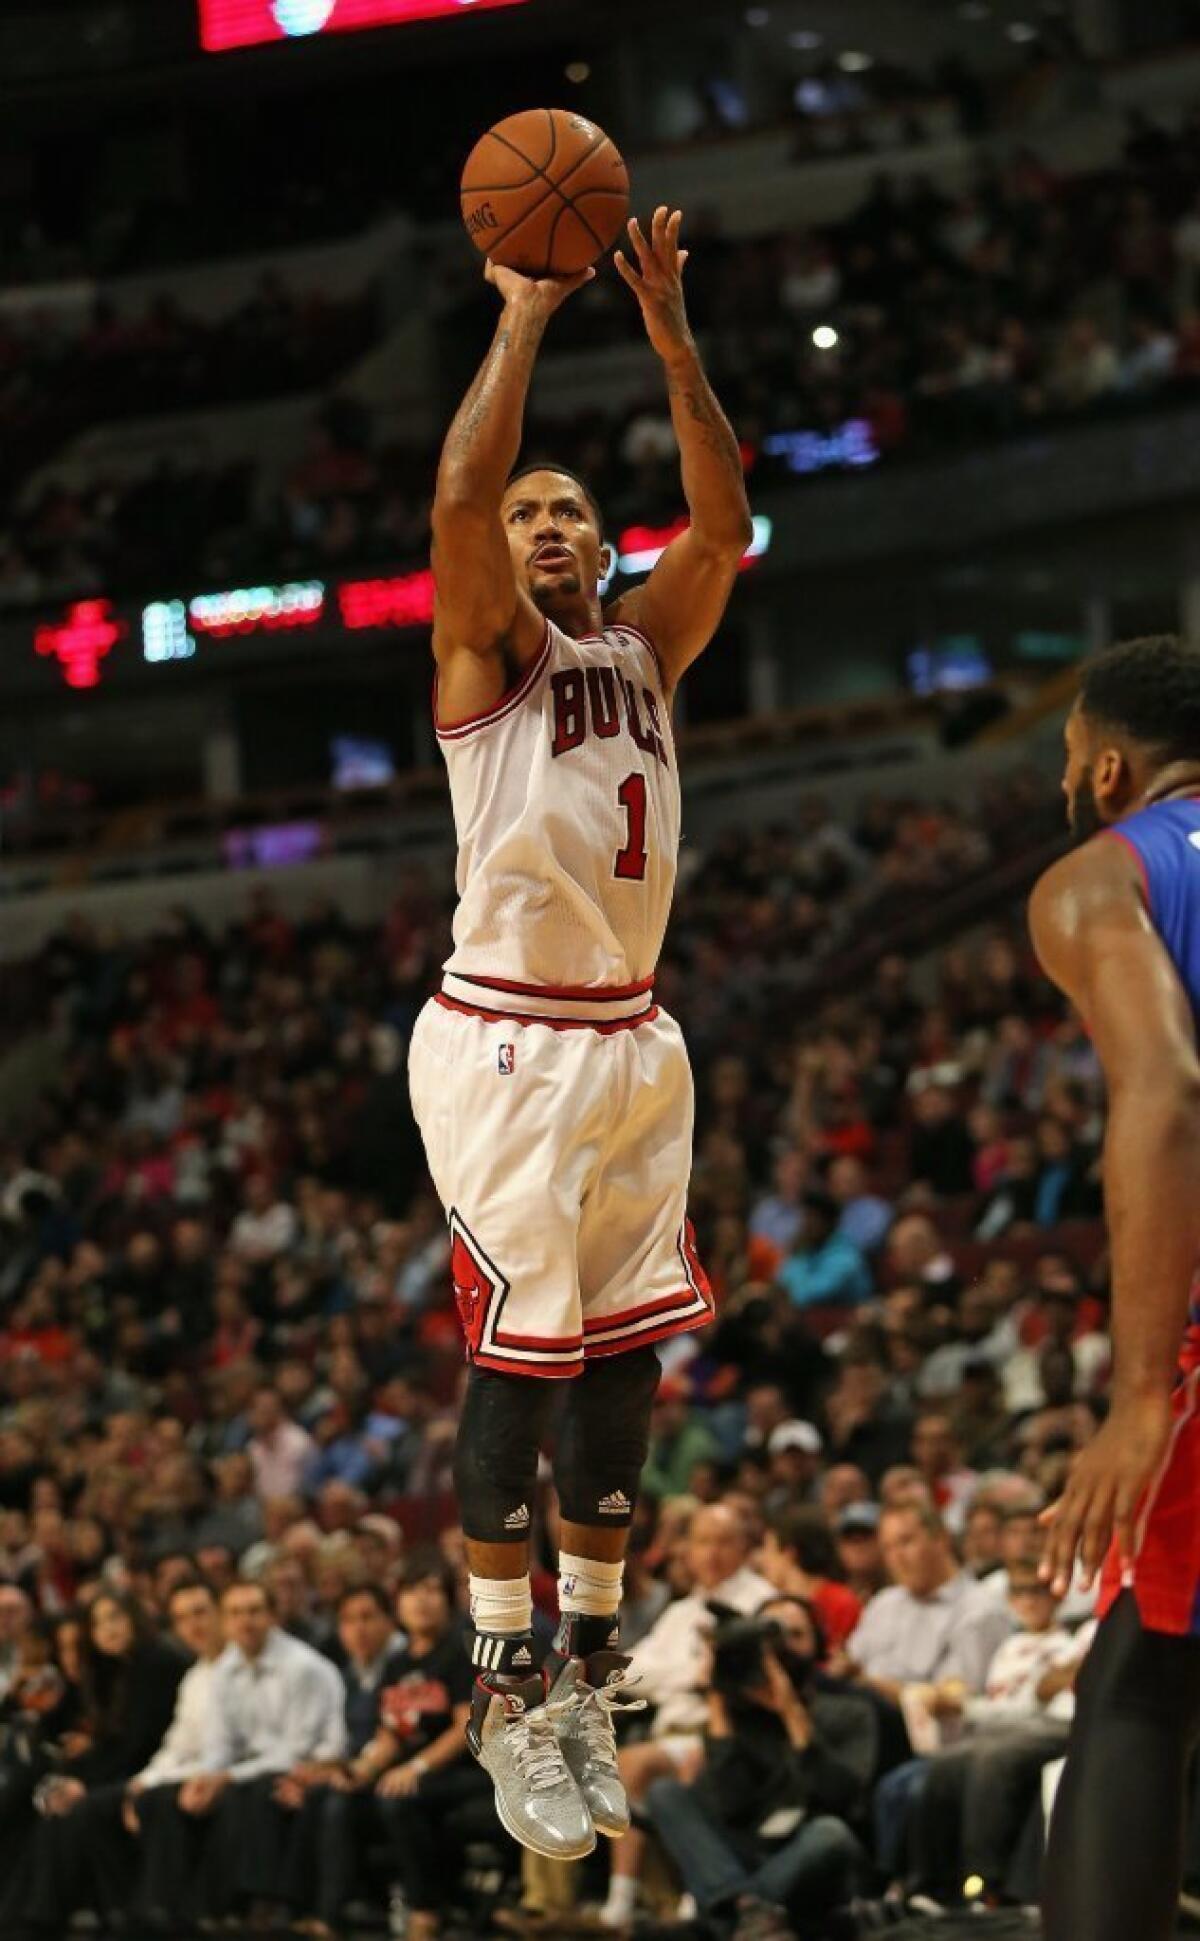 Bulls Derrick Rose out again with knee injury, needs surgery